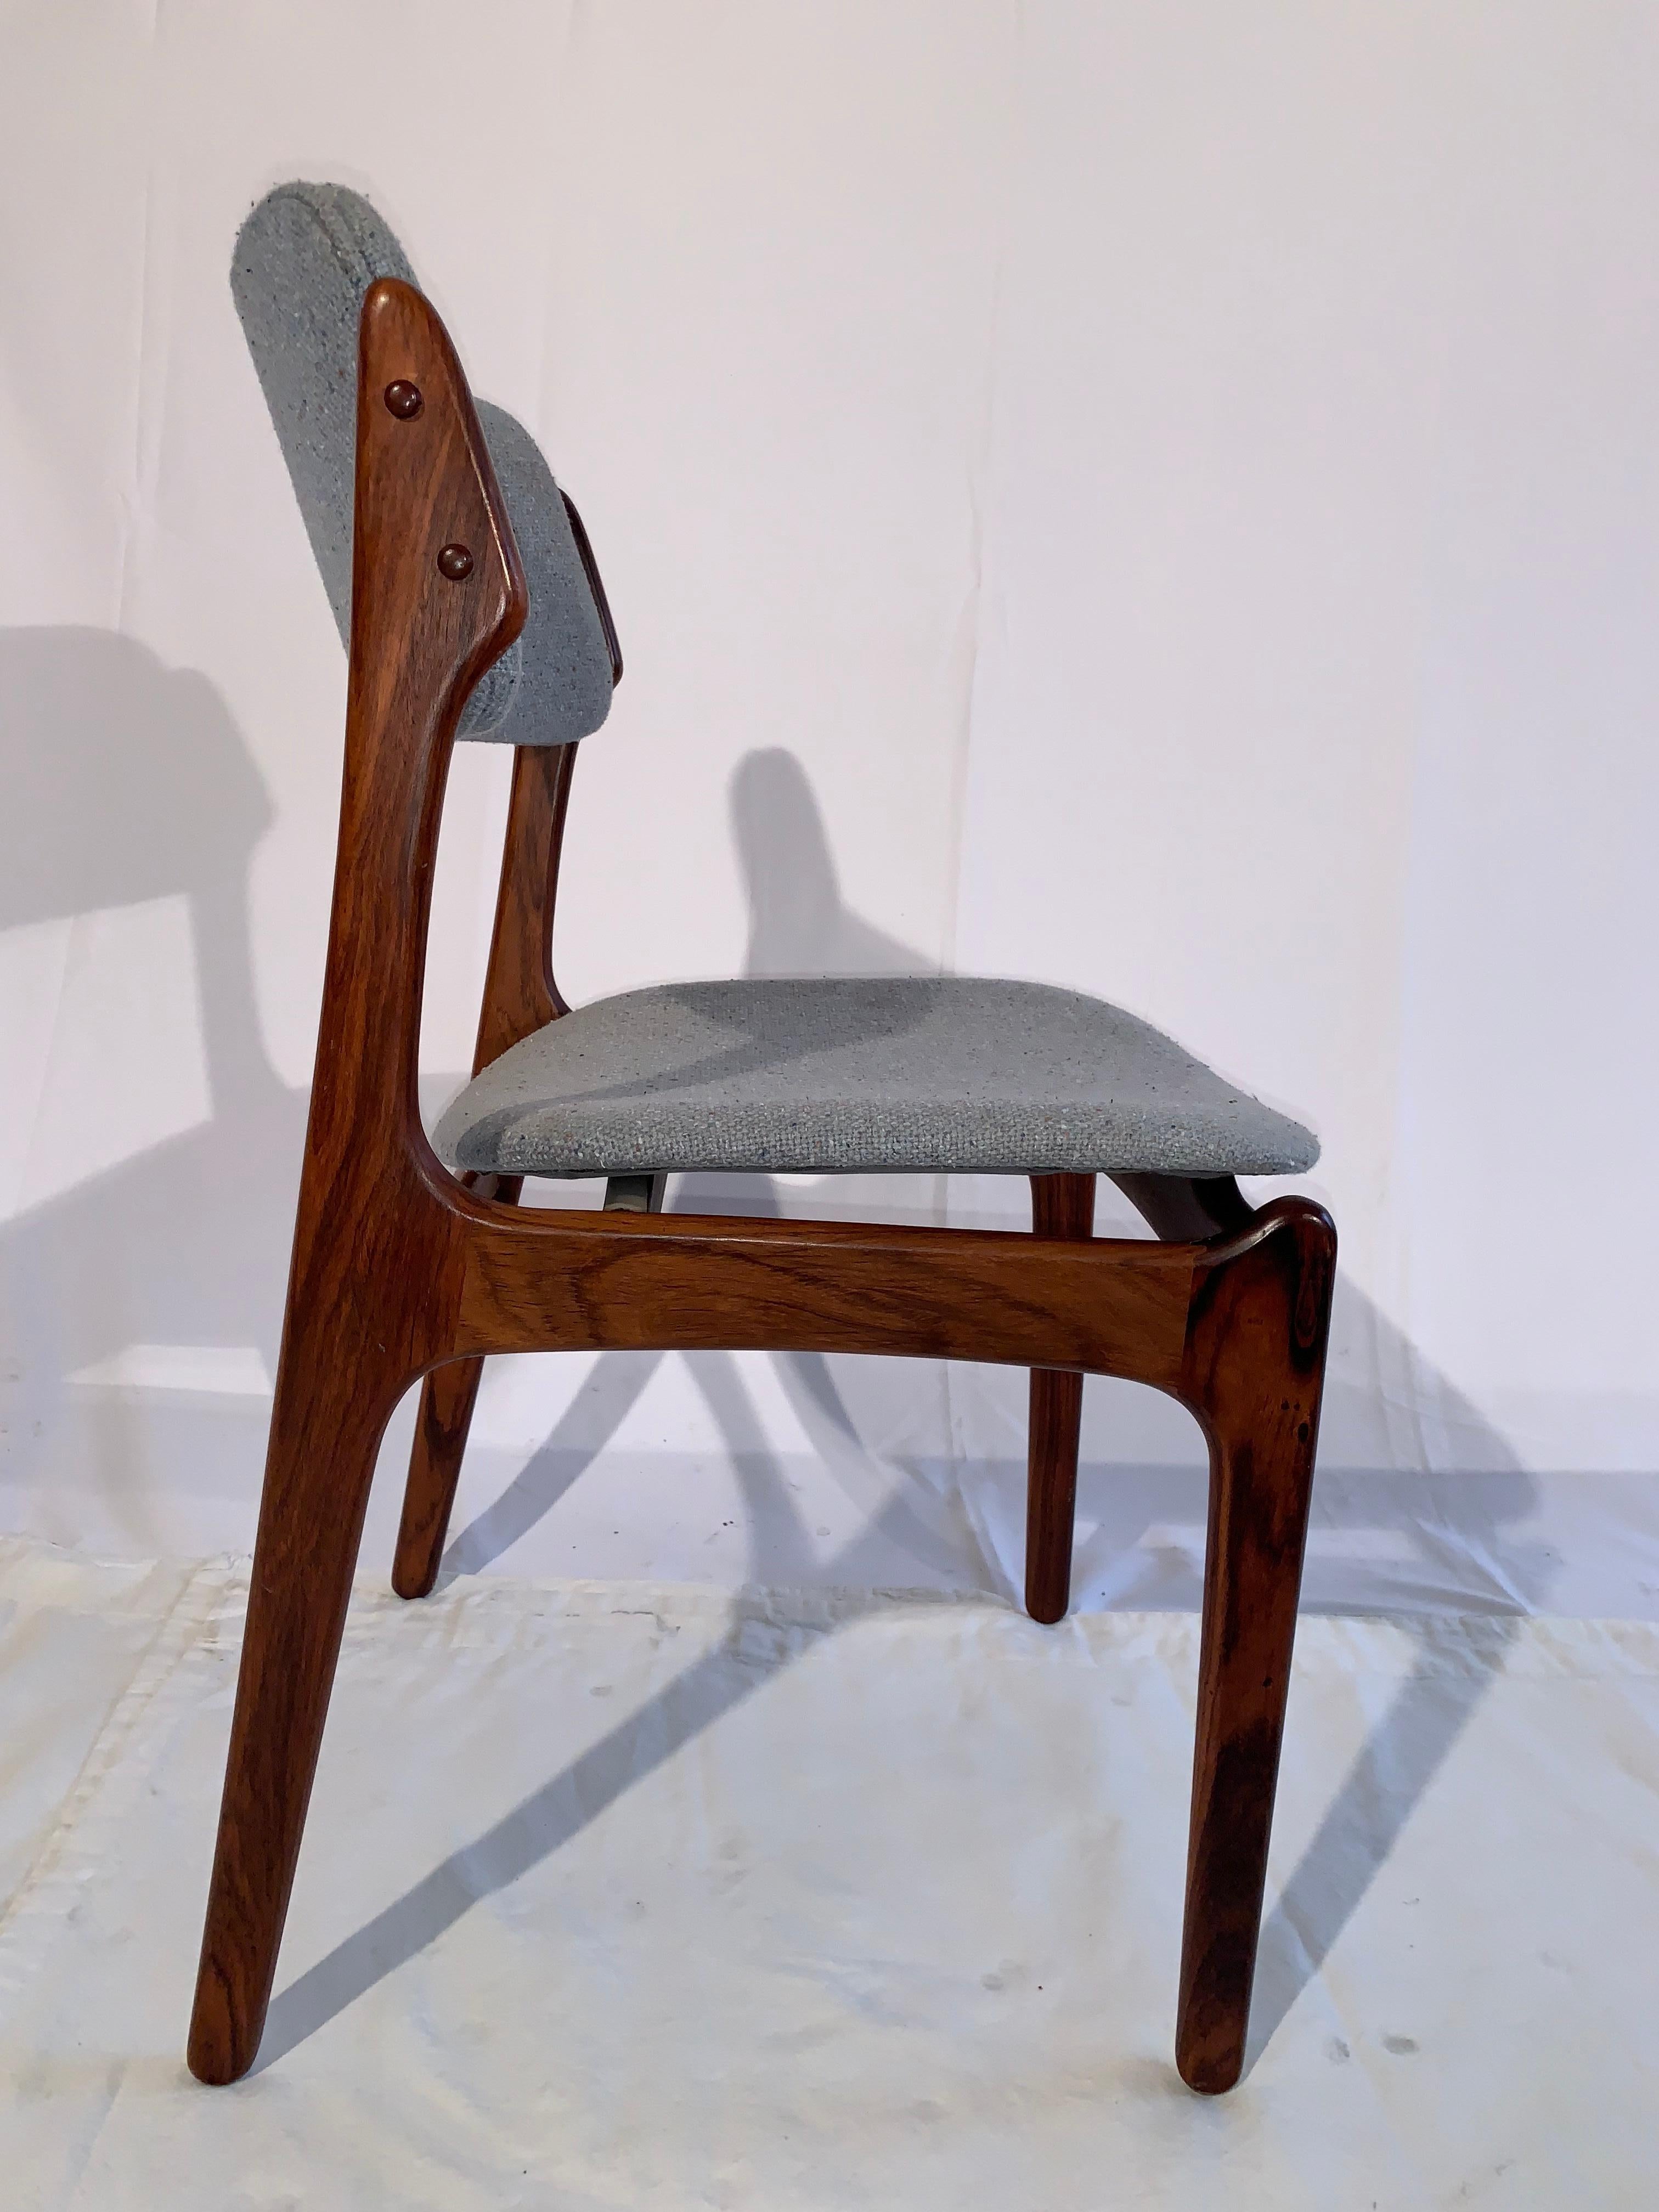 Just arrived!
A wonderful set of 8 rosewood Danish dining chairs by Erik Buch.
The frames have a striking rosewood grain. No wobbles or loose joints. The fabric is original and should be changed.